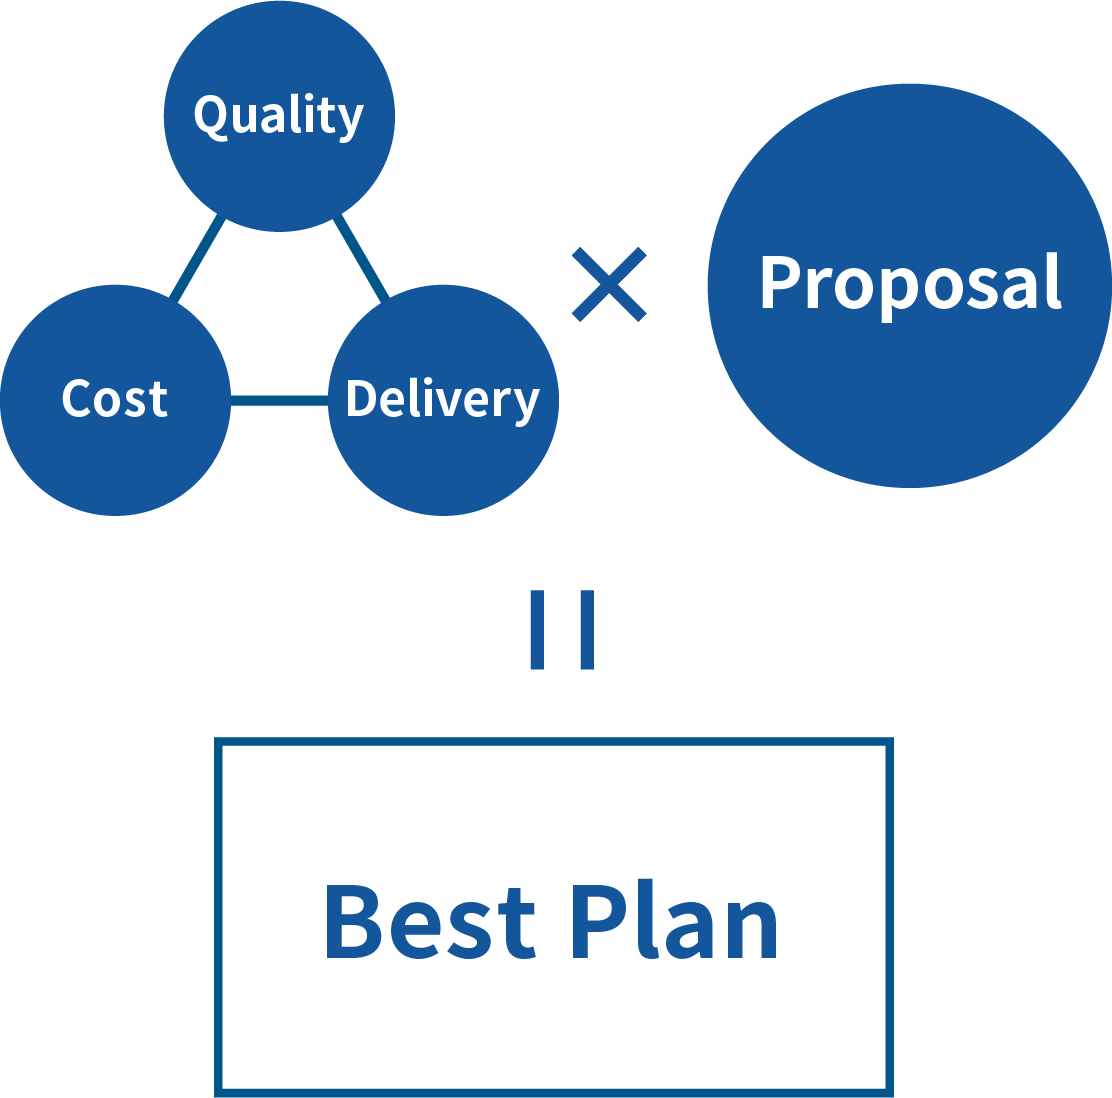 Quality + Cost + Delivery = Best Plan